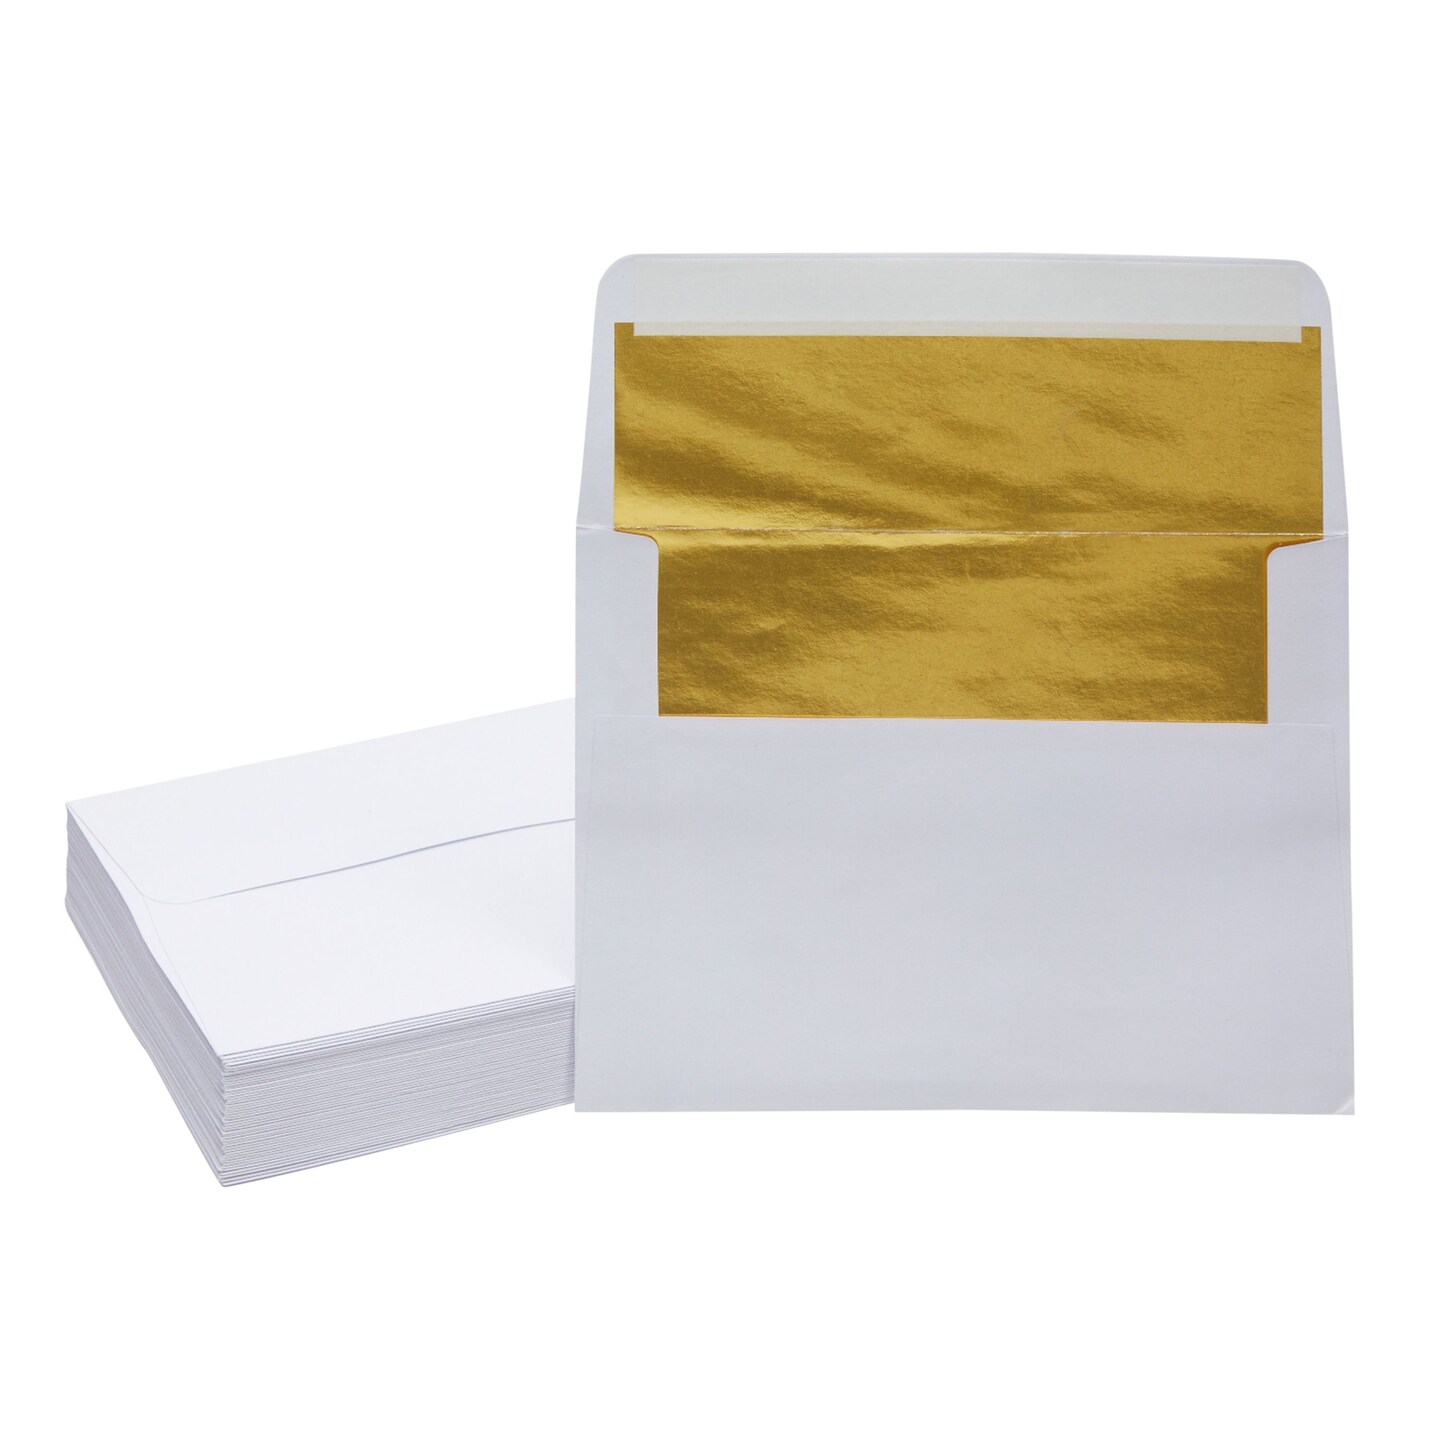 50 Pack Pre-Folded Vellum Jackets for 5x7 Invitations - Gold Foil Pattern 